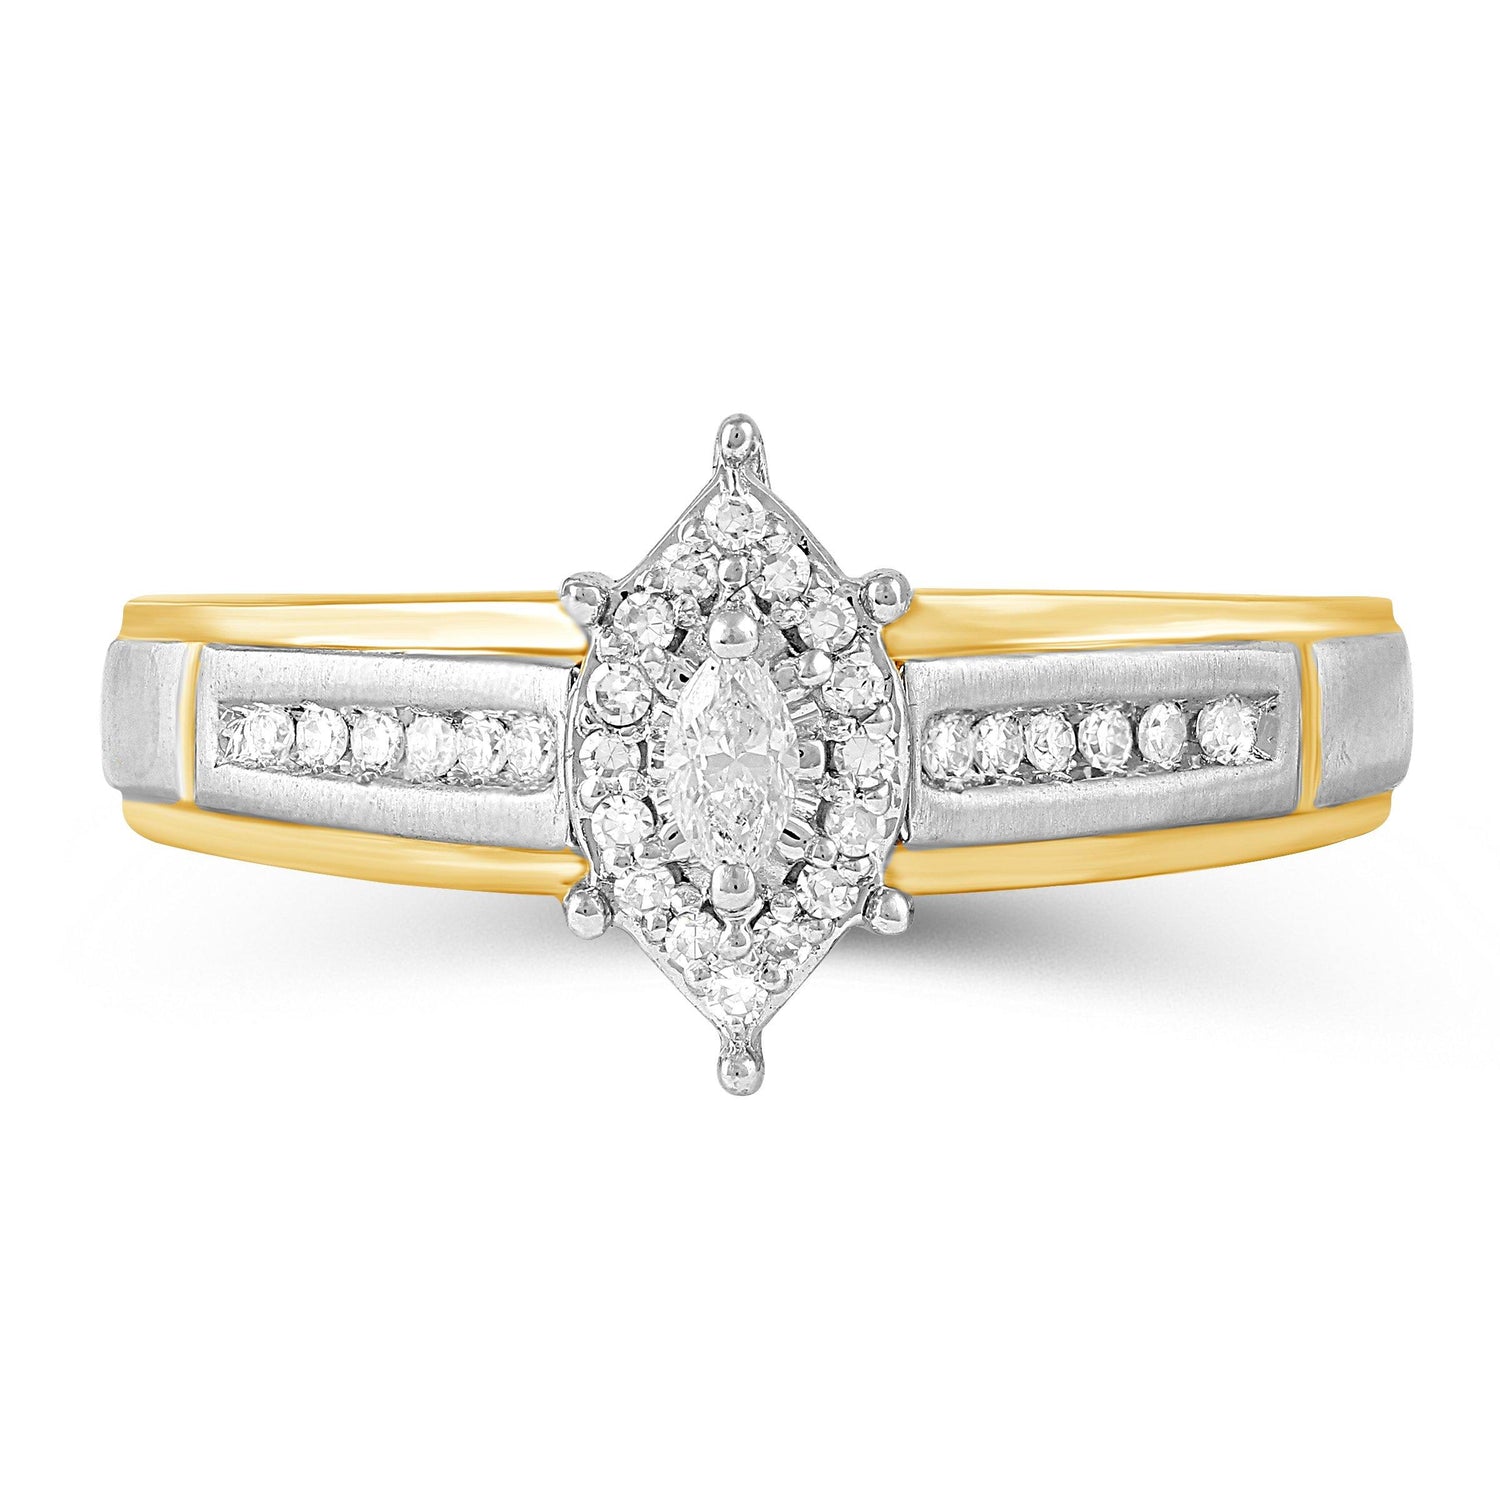 1/5CT TW Marquise Diamond Engagement Ring from Trio Bridal set in 10KT Yellow Gold - Fifth and Fine